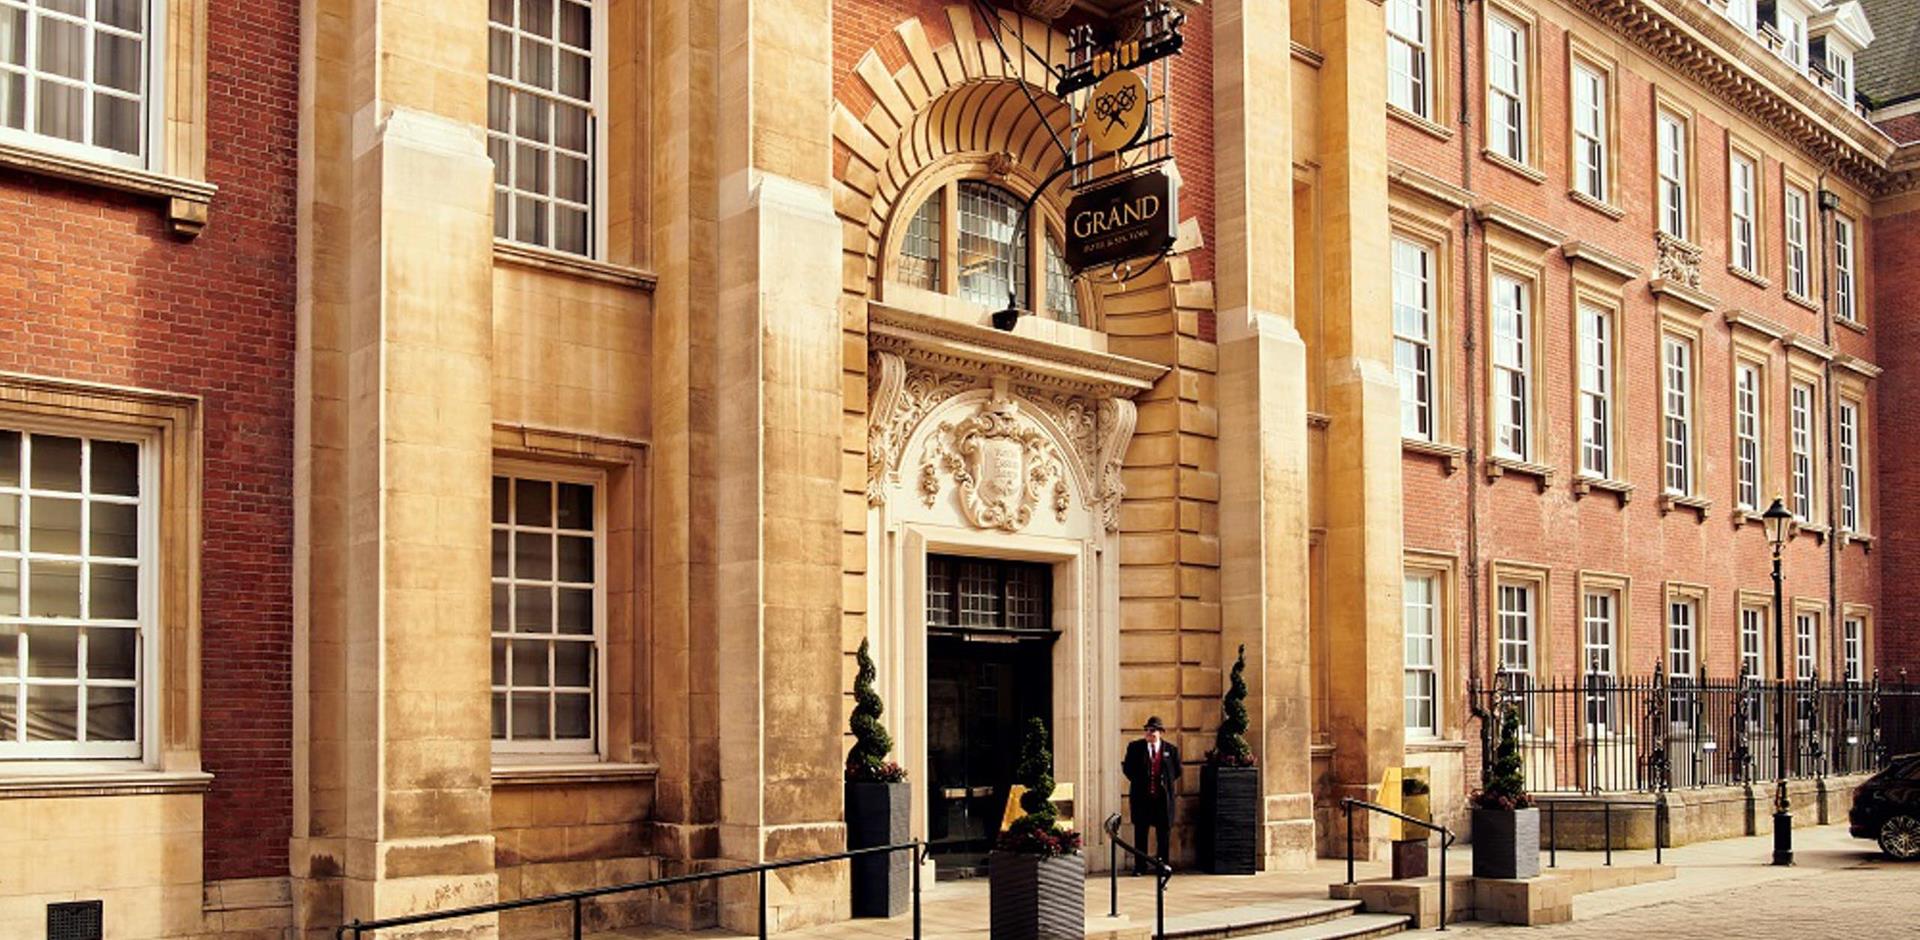 Grand Hotel Spa York_Front facing shot of The Grand with concierge